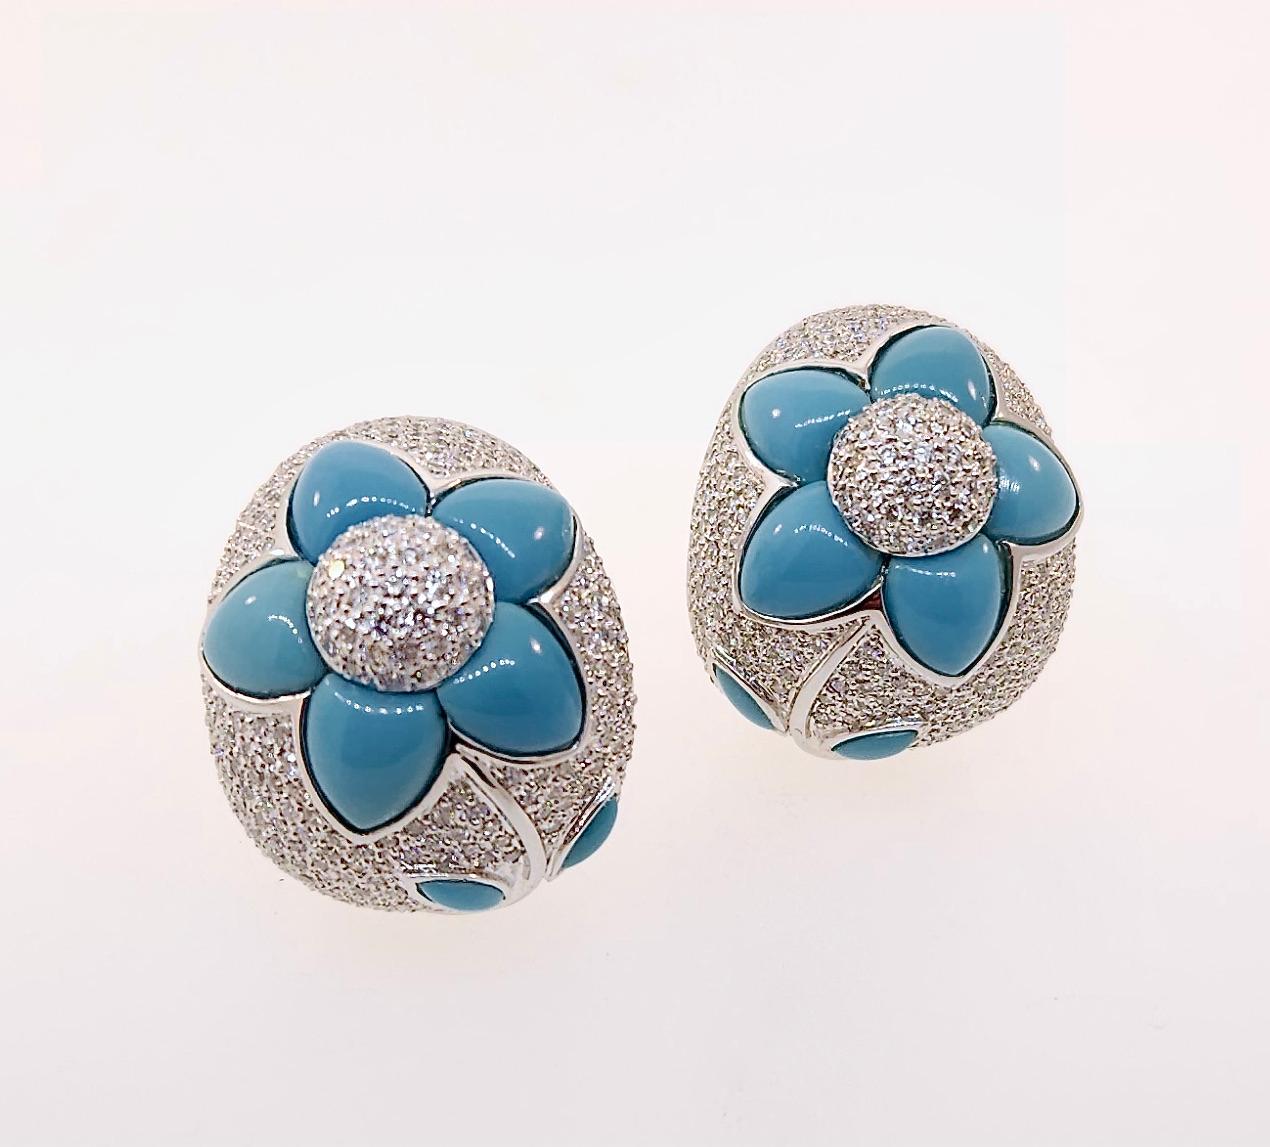 Thank you for viewing these large 18k white gold diamond & turquoise earrings.  There are approximately 775 diamonds weighting approximately 6.00 carats.  The diamonds are an average color of H/I with an average clarity of SI2.  The earrings weight